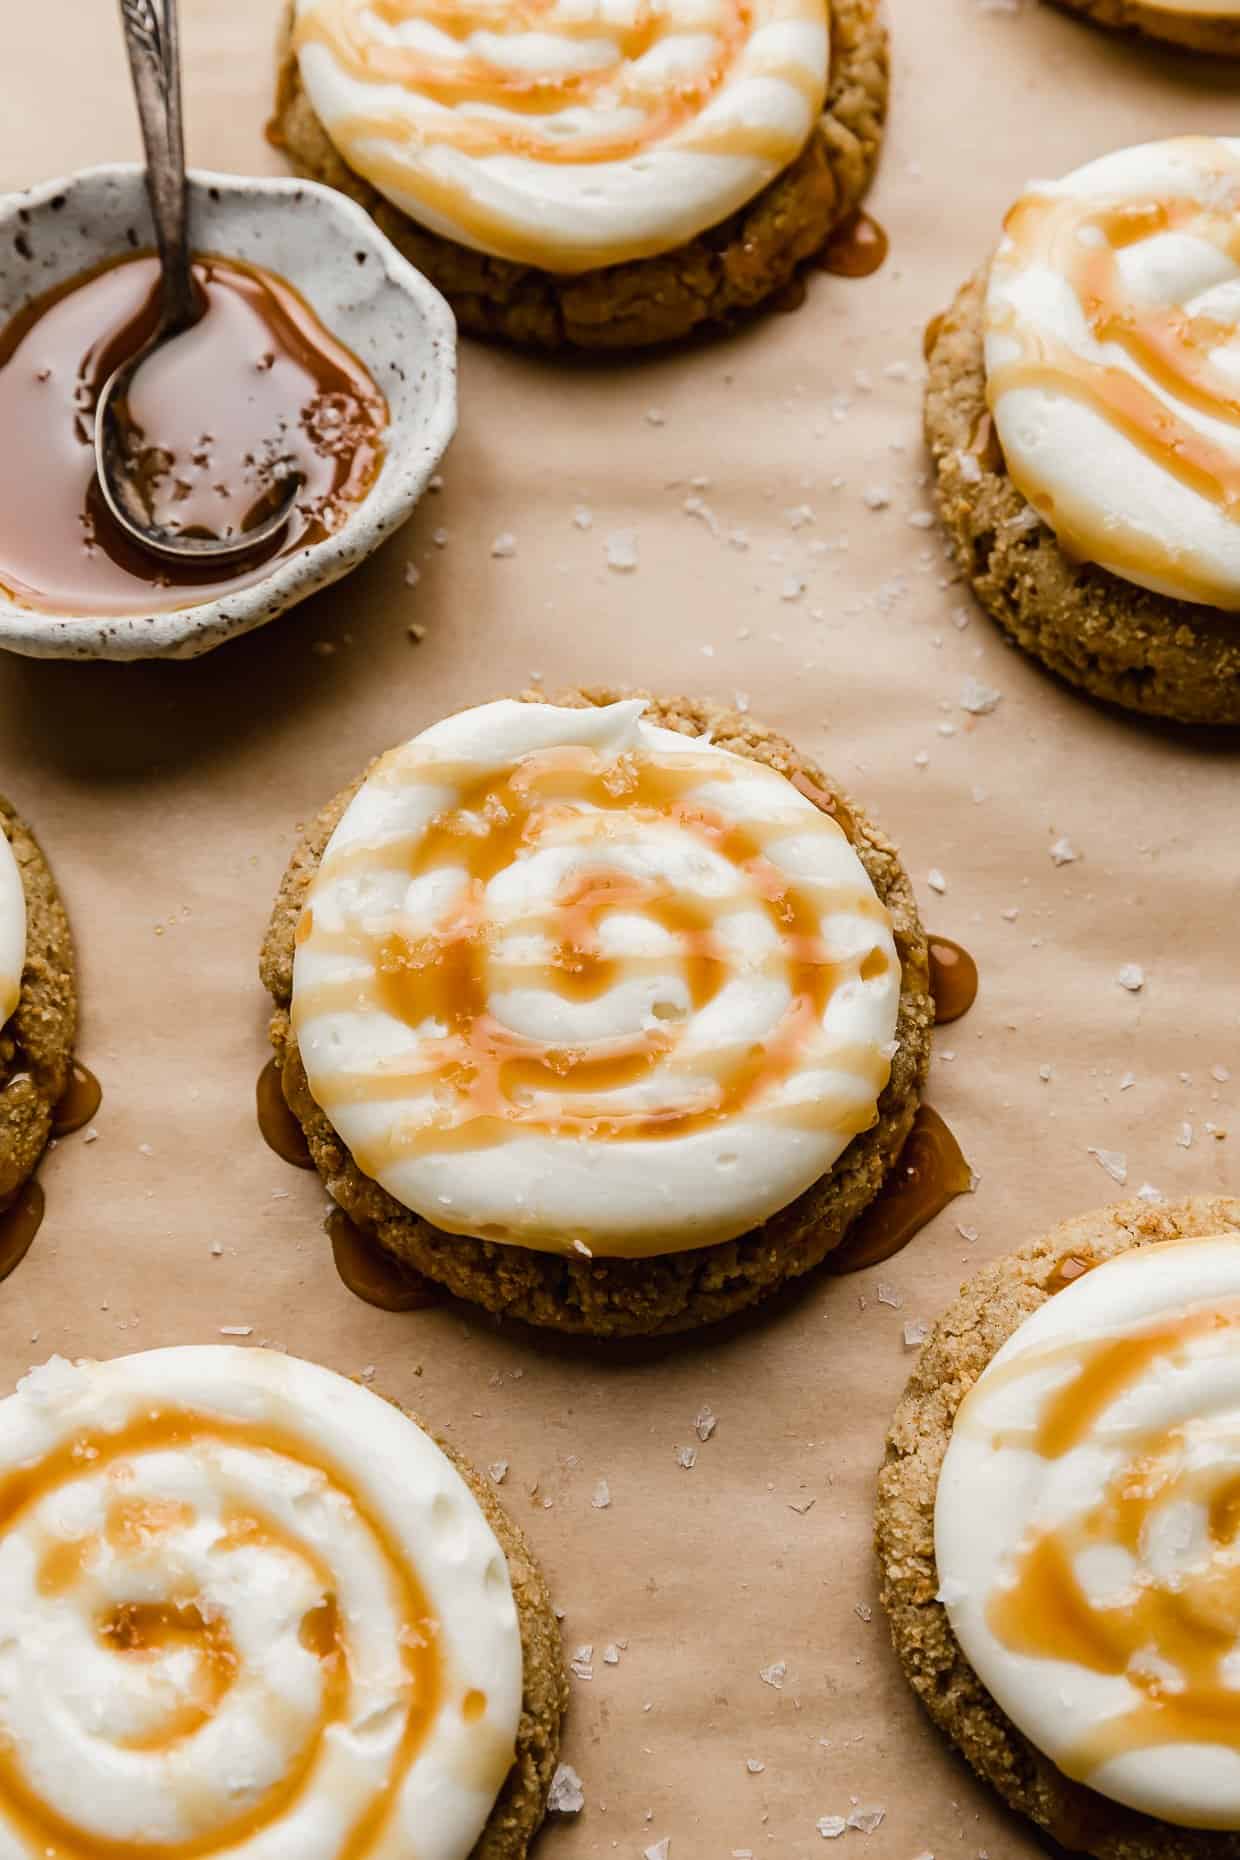 Crumbl Salted Caramel Cheesecake Cookies on a tan parchment paper, each cookie topped with a swirl of caramel cream cheese frosting, caramel, and flaky sea salt.